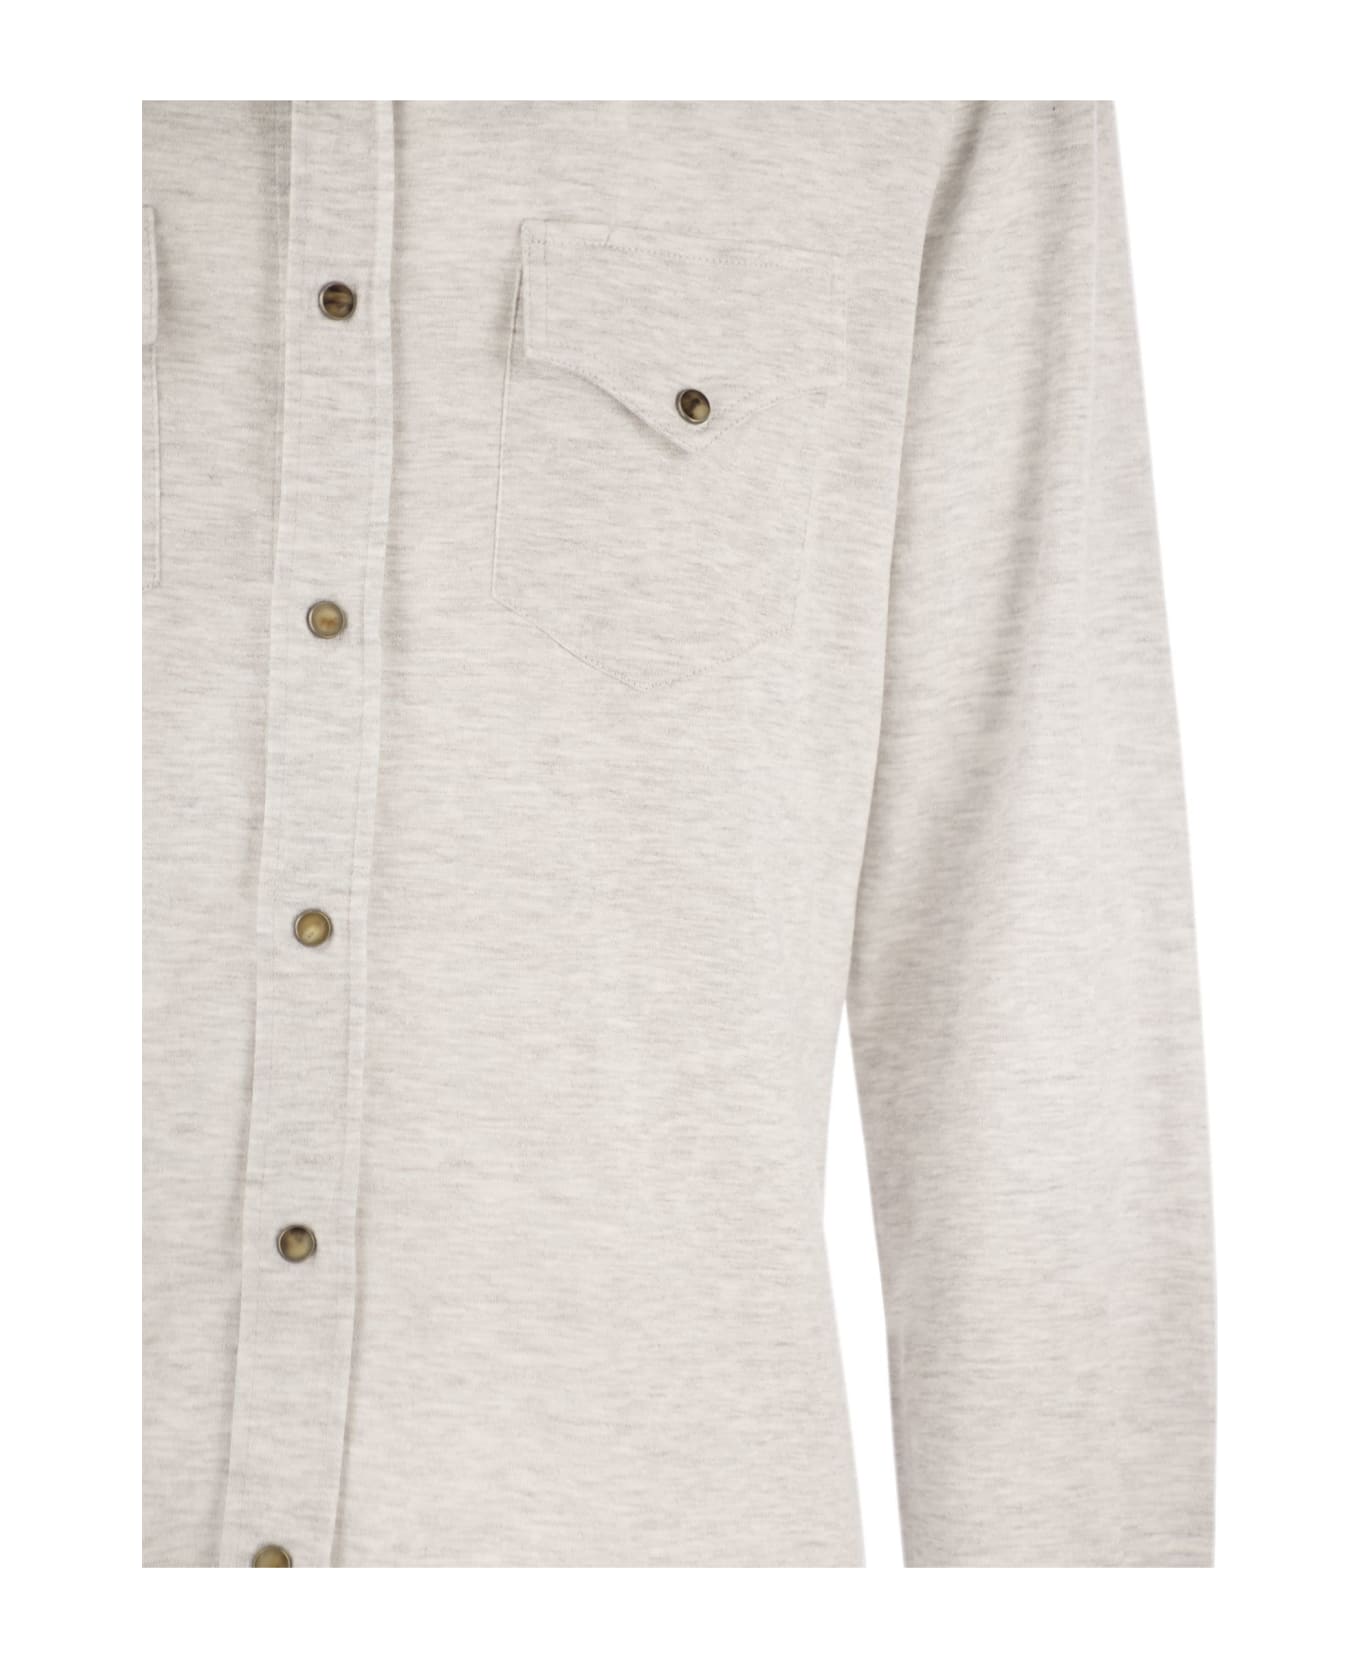 Brunello Cucinelli Linen And Cotton Blend Leisure Fit Shirt With Press Studs And Pockets - Pearl シャツ